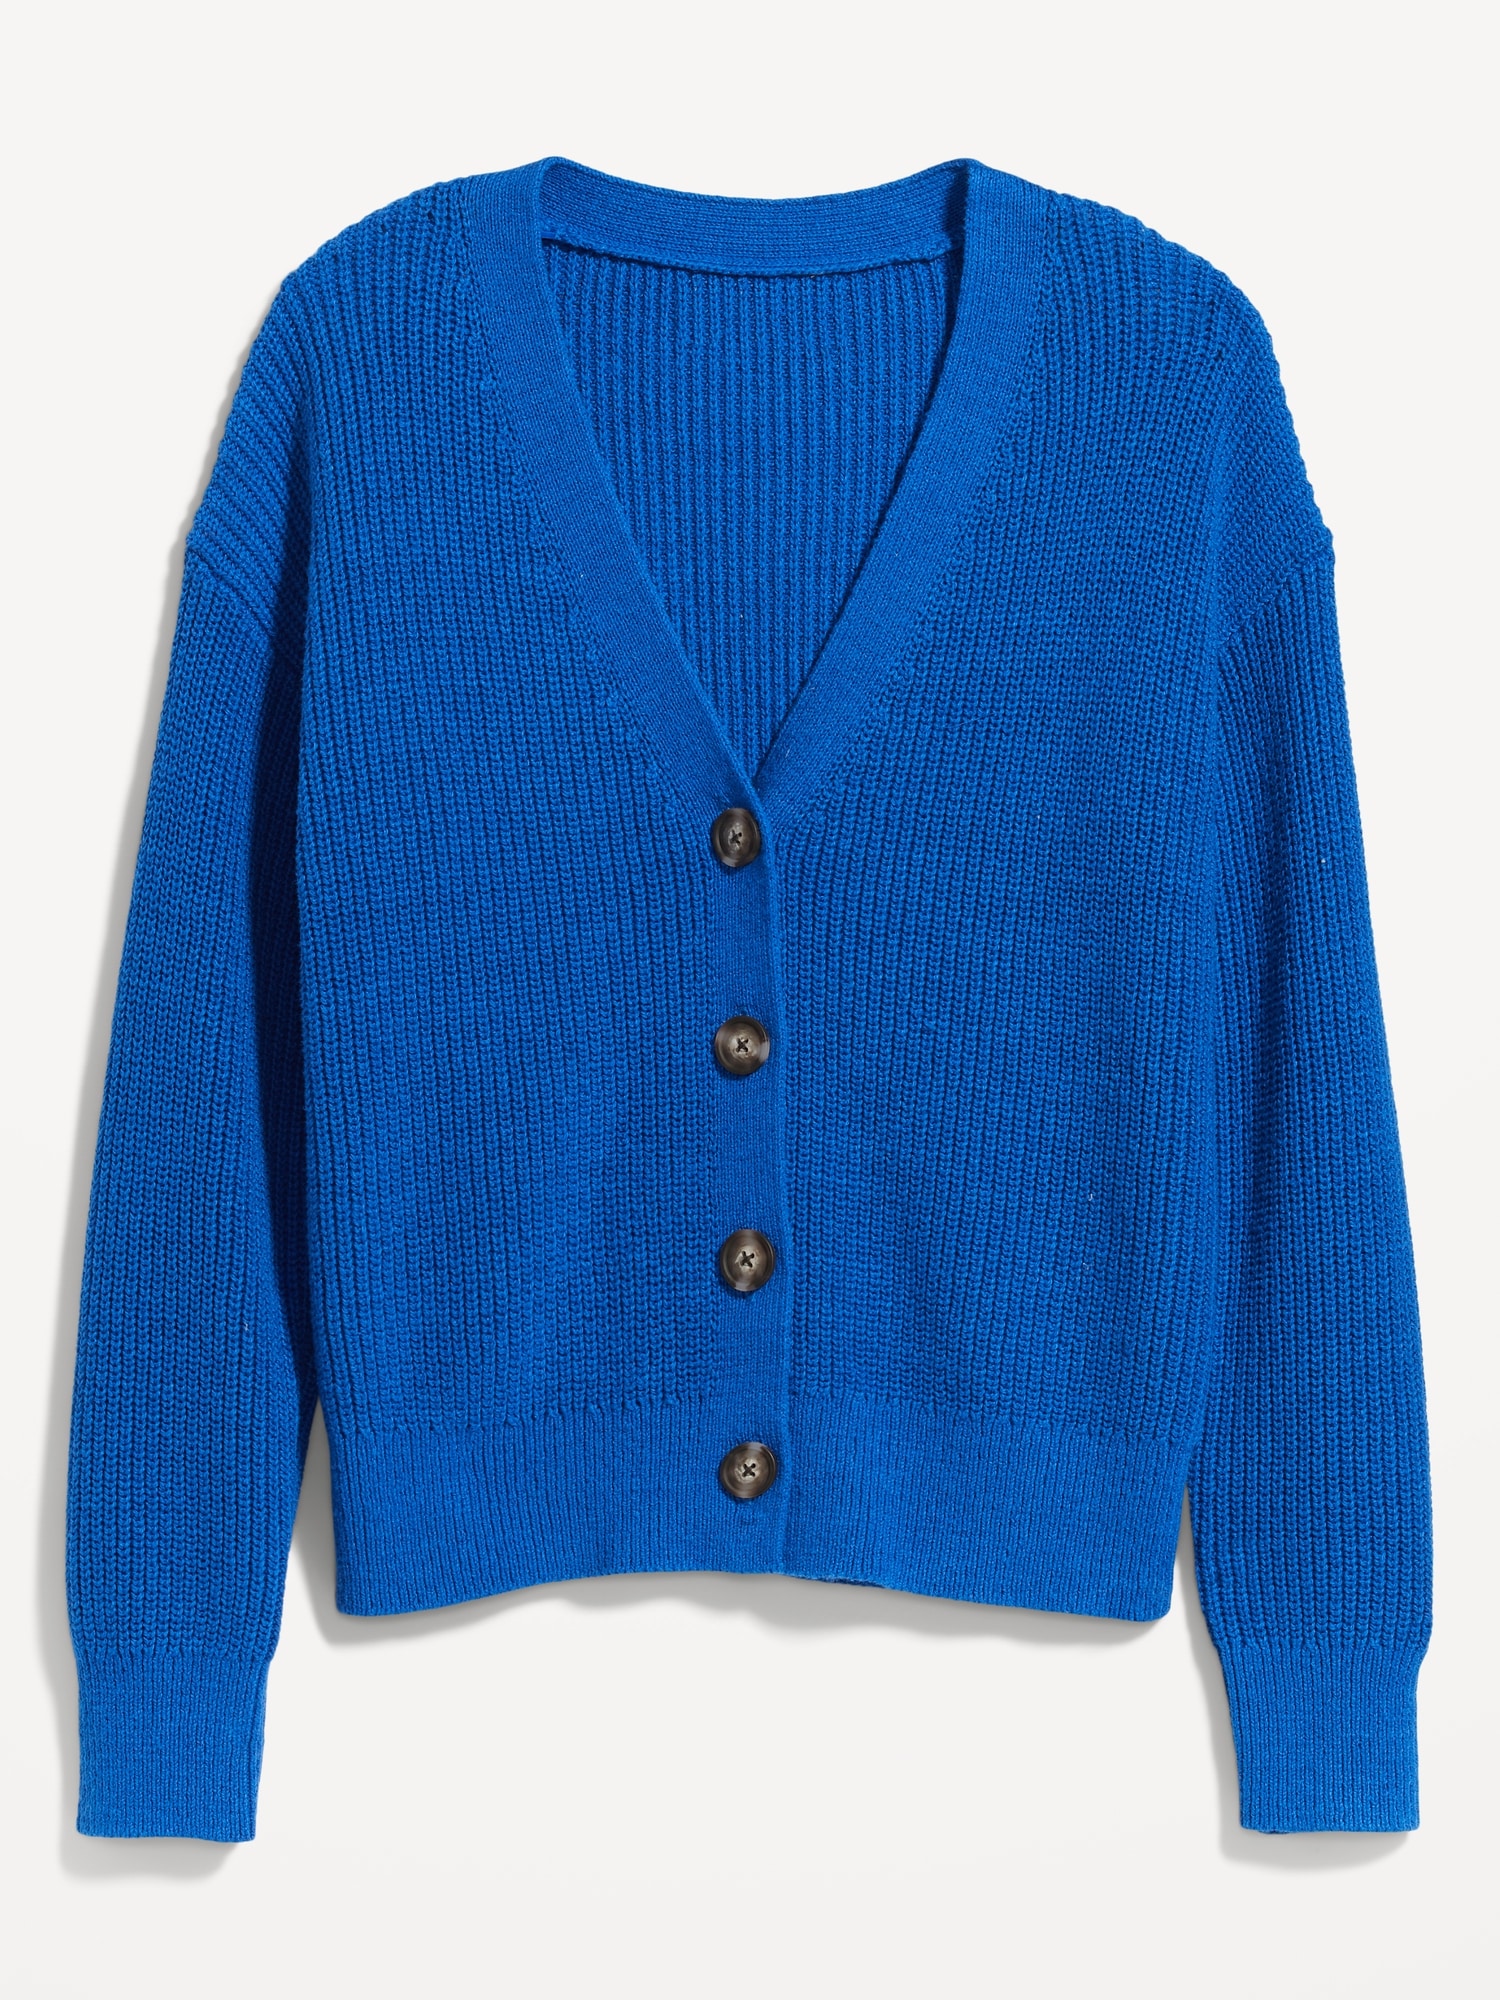 Lightweight Cotton and Linen-Blend Shaker-Stitch Sweater | Cardigan for Women Navy Old